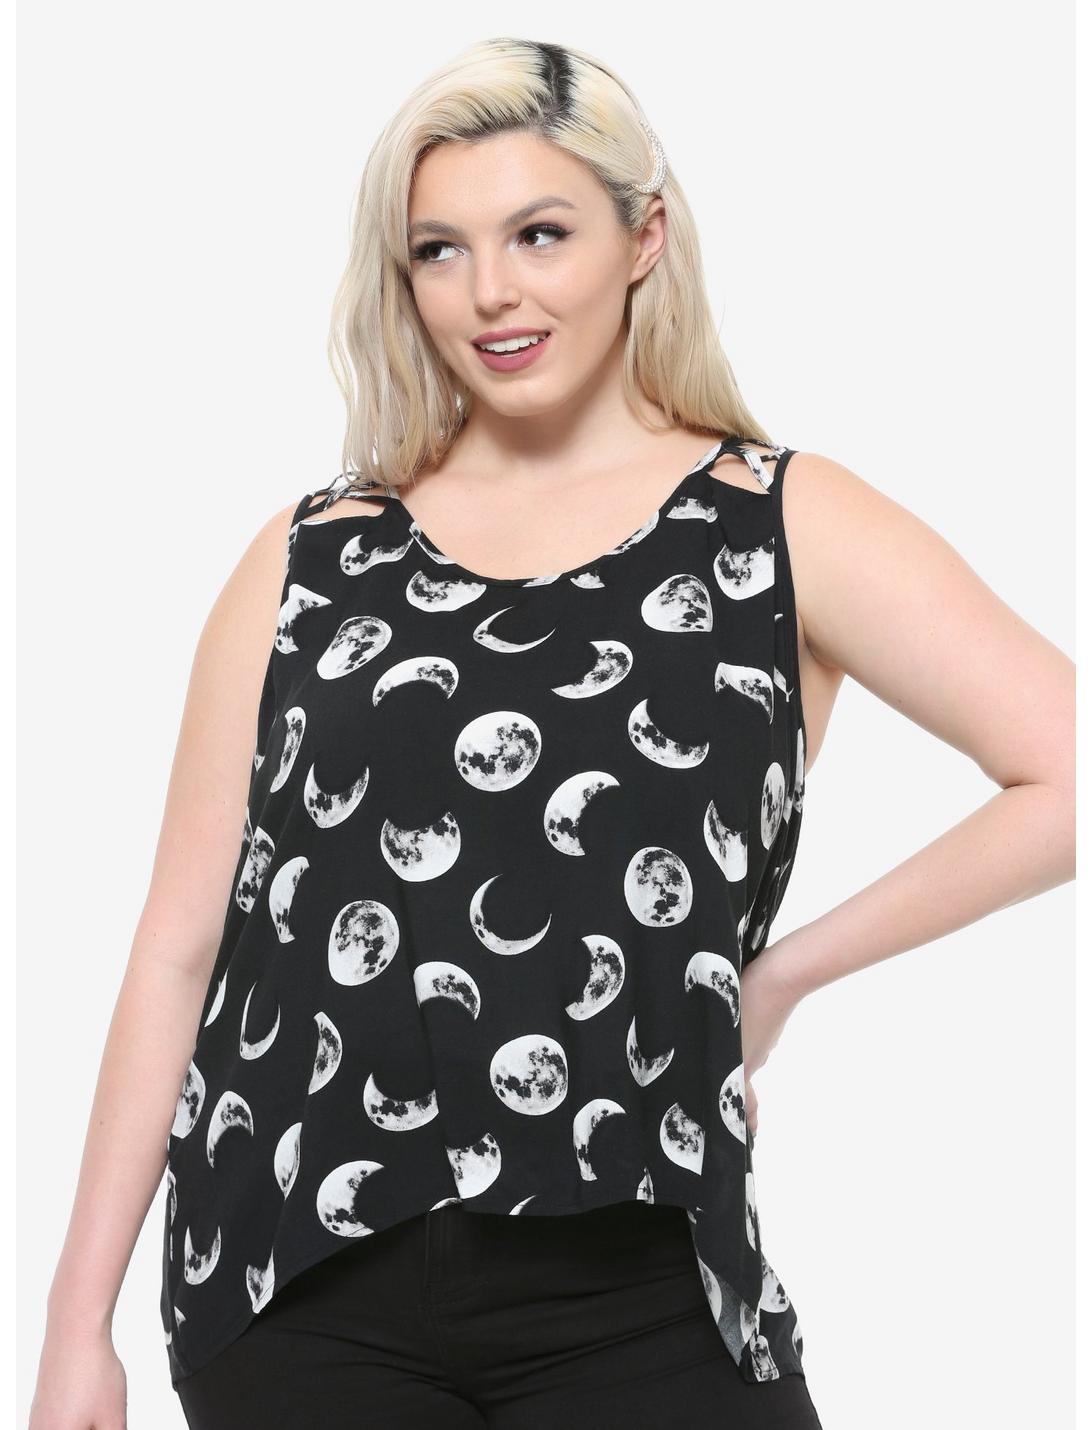 Moon Phases Strappy Back Girls Tank Top Plus Size, MULTI, hi-res